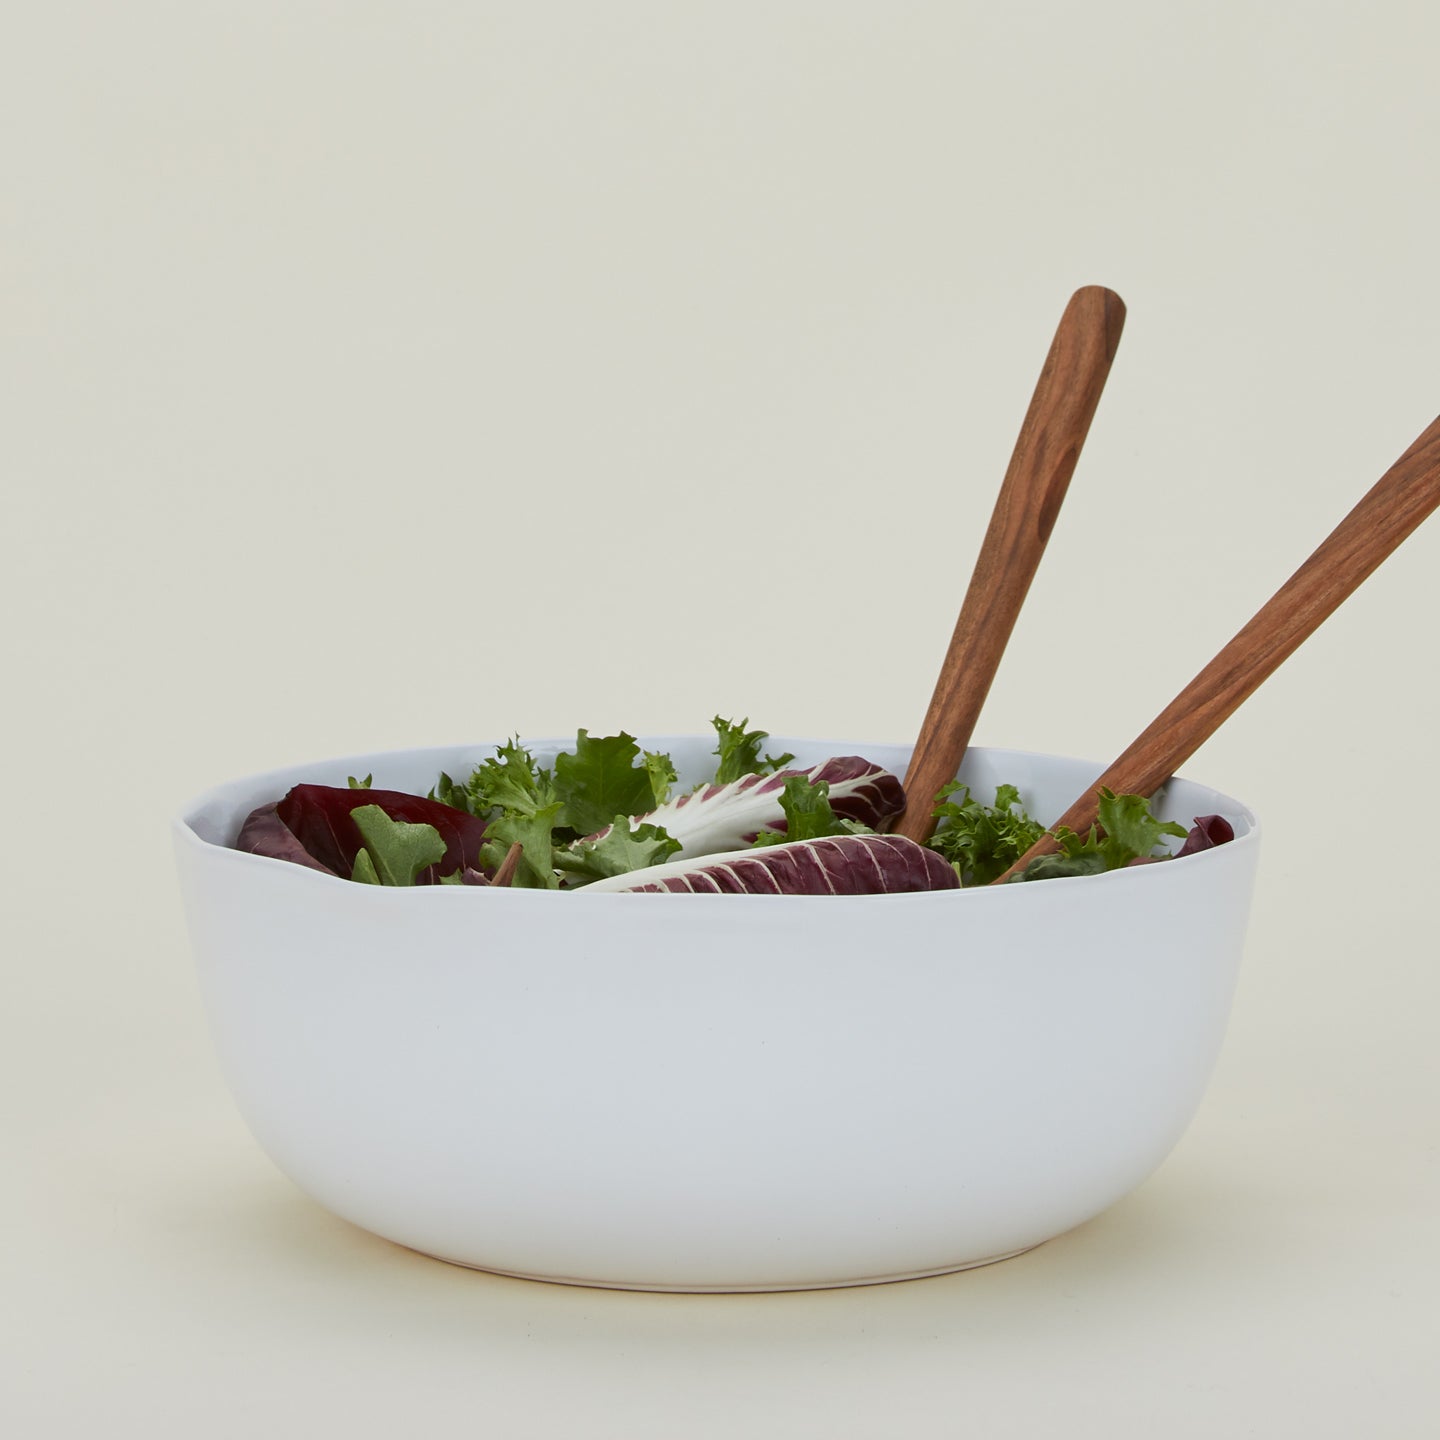 White Strata Serving Bowl in Medium size, with salad.